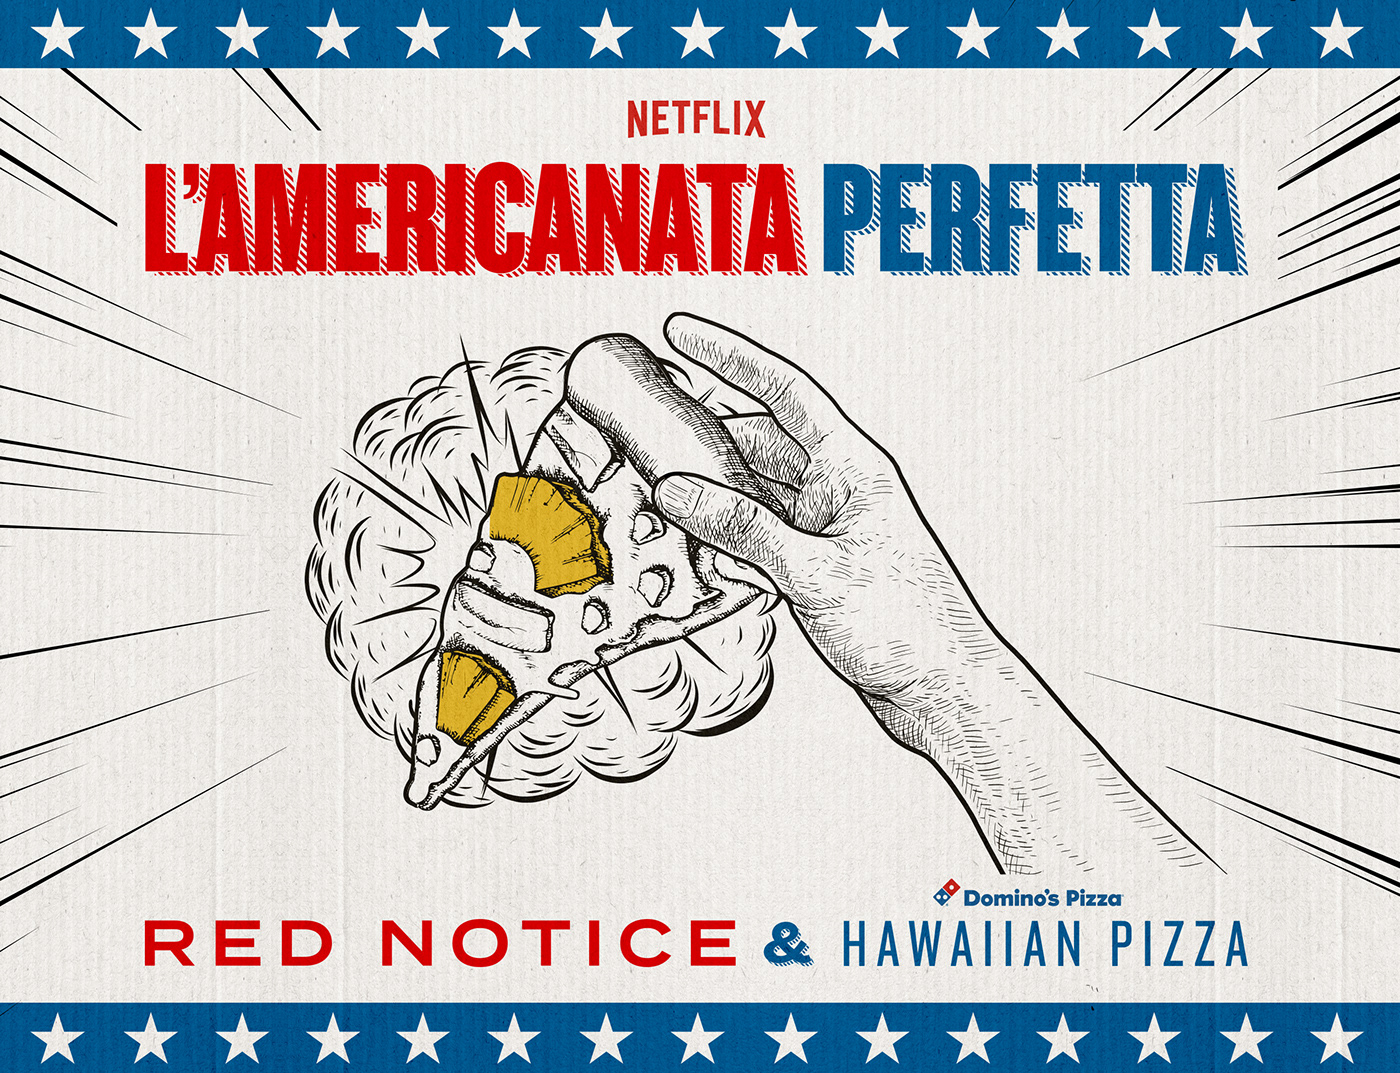 america Dwayne Johnson editorial Netflix Packaging Pineapple Pizza promo red notice social